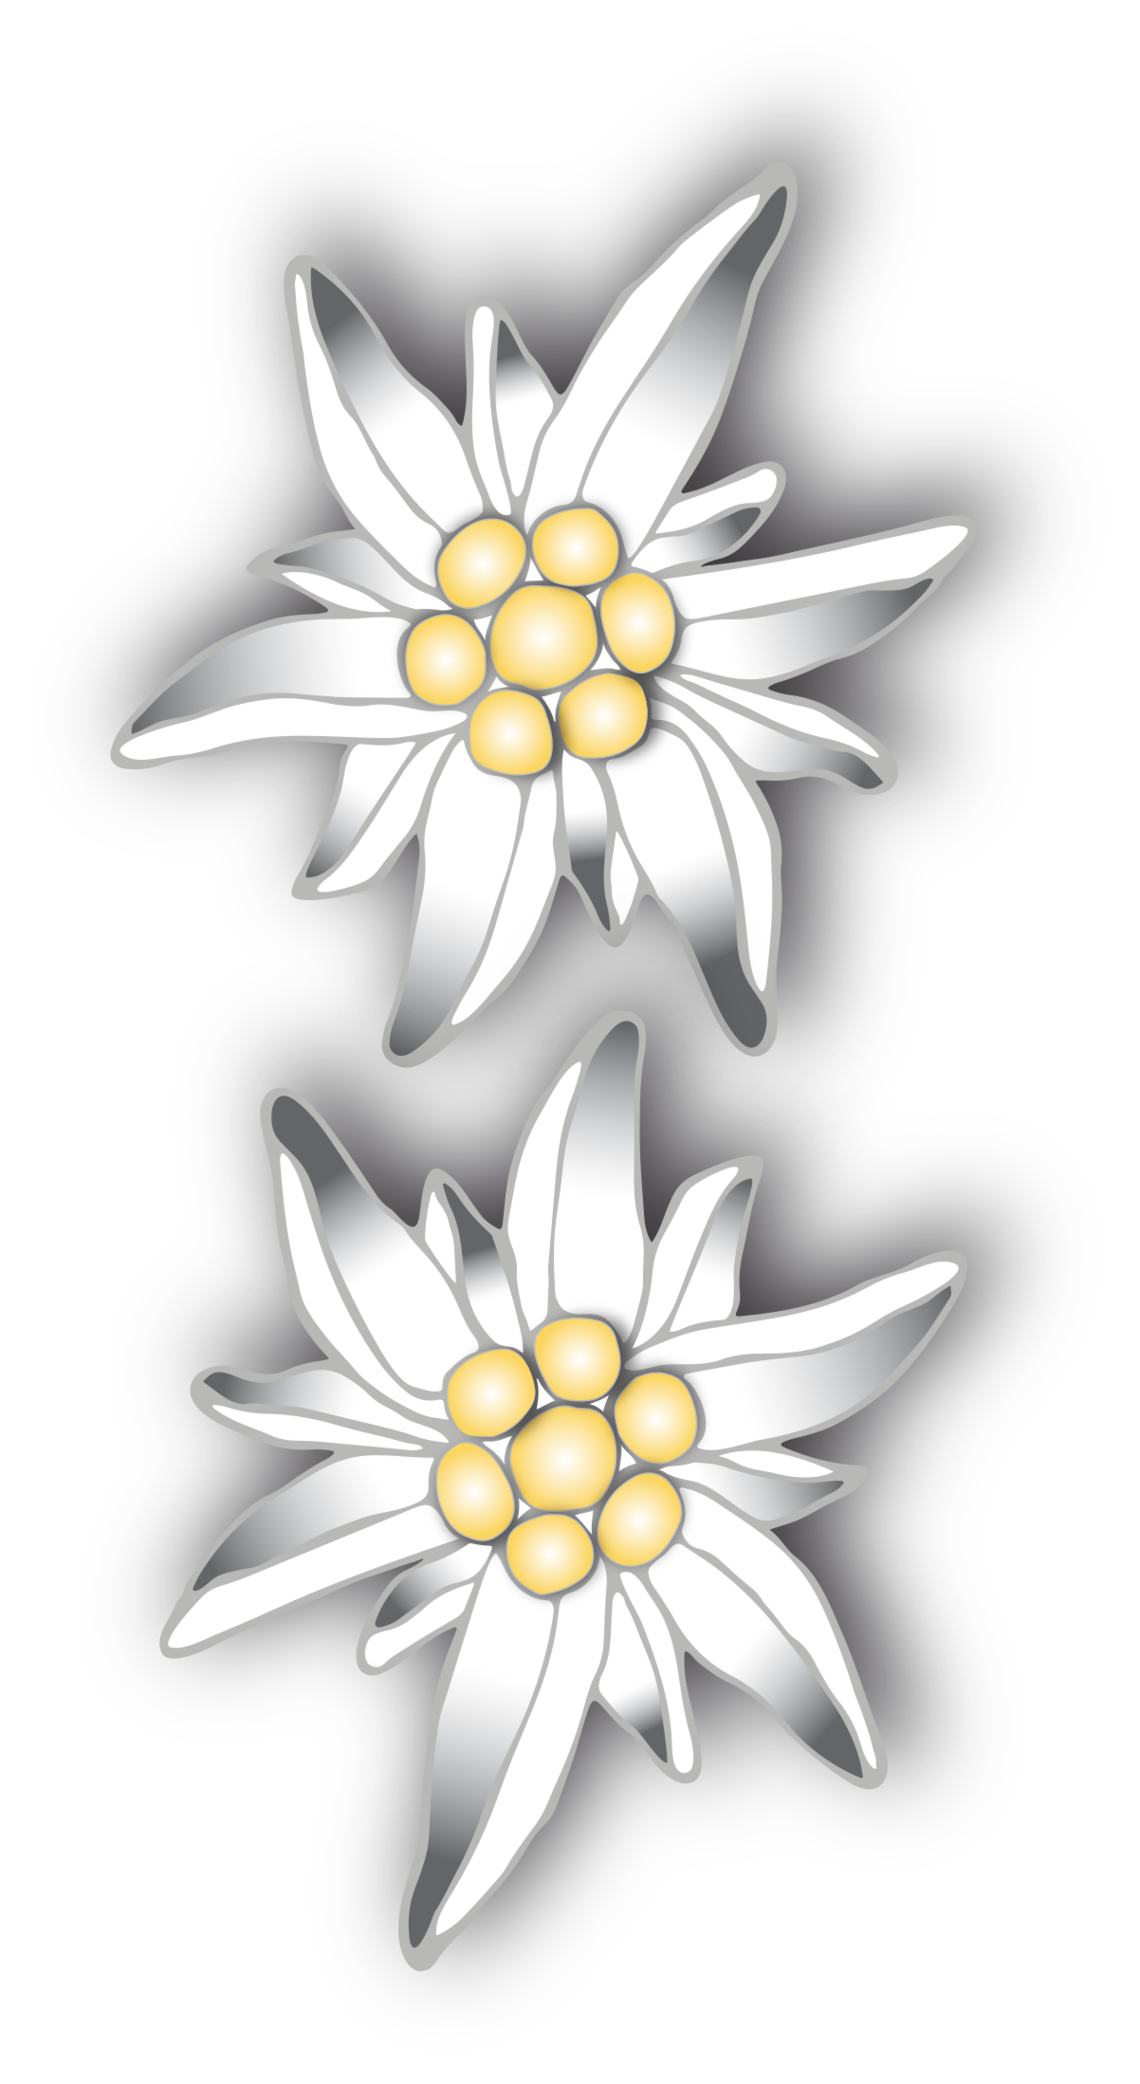 Edelweiss Transparent PNG Pictures.